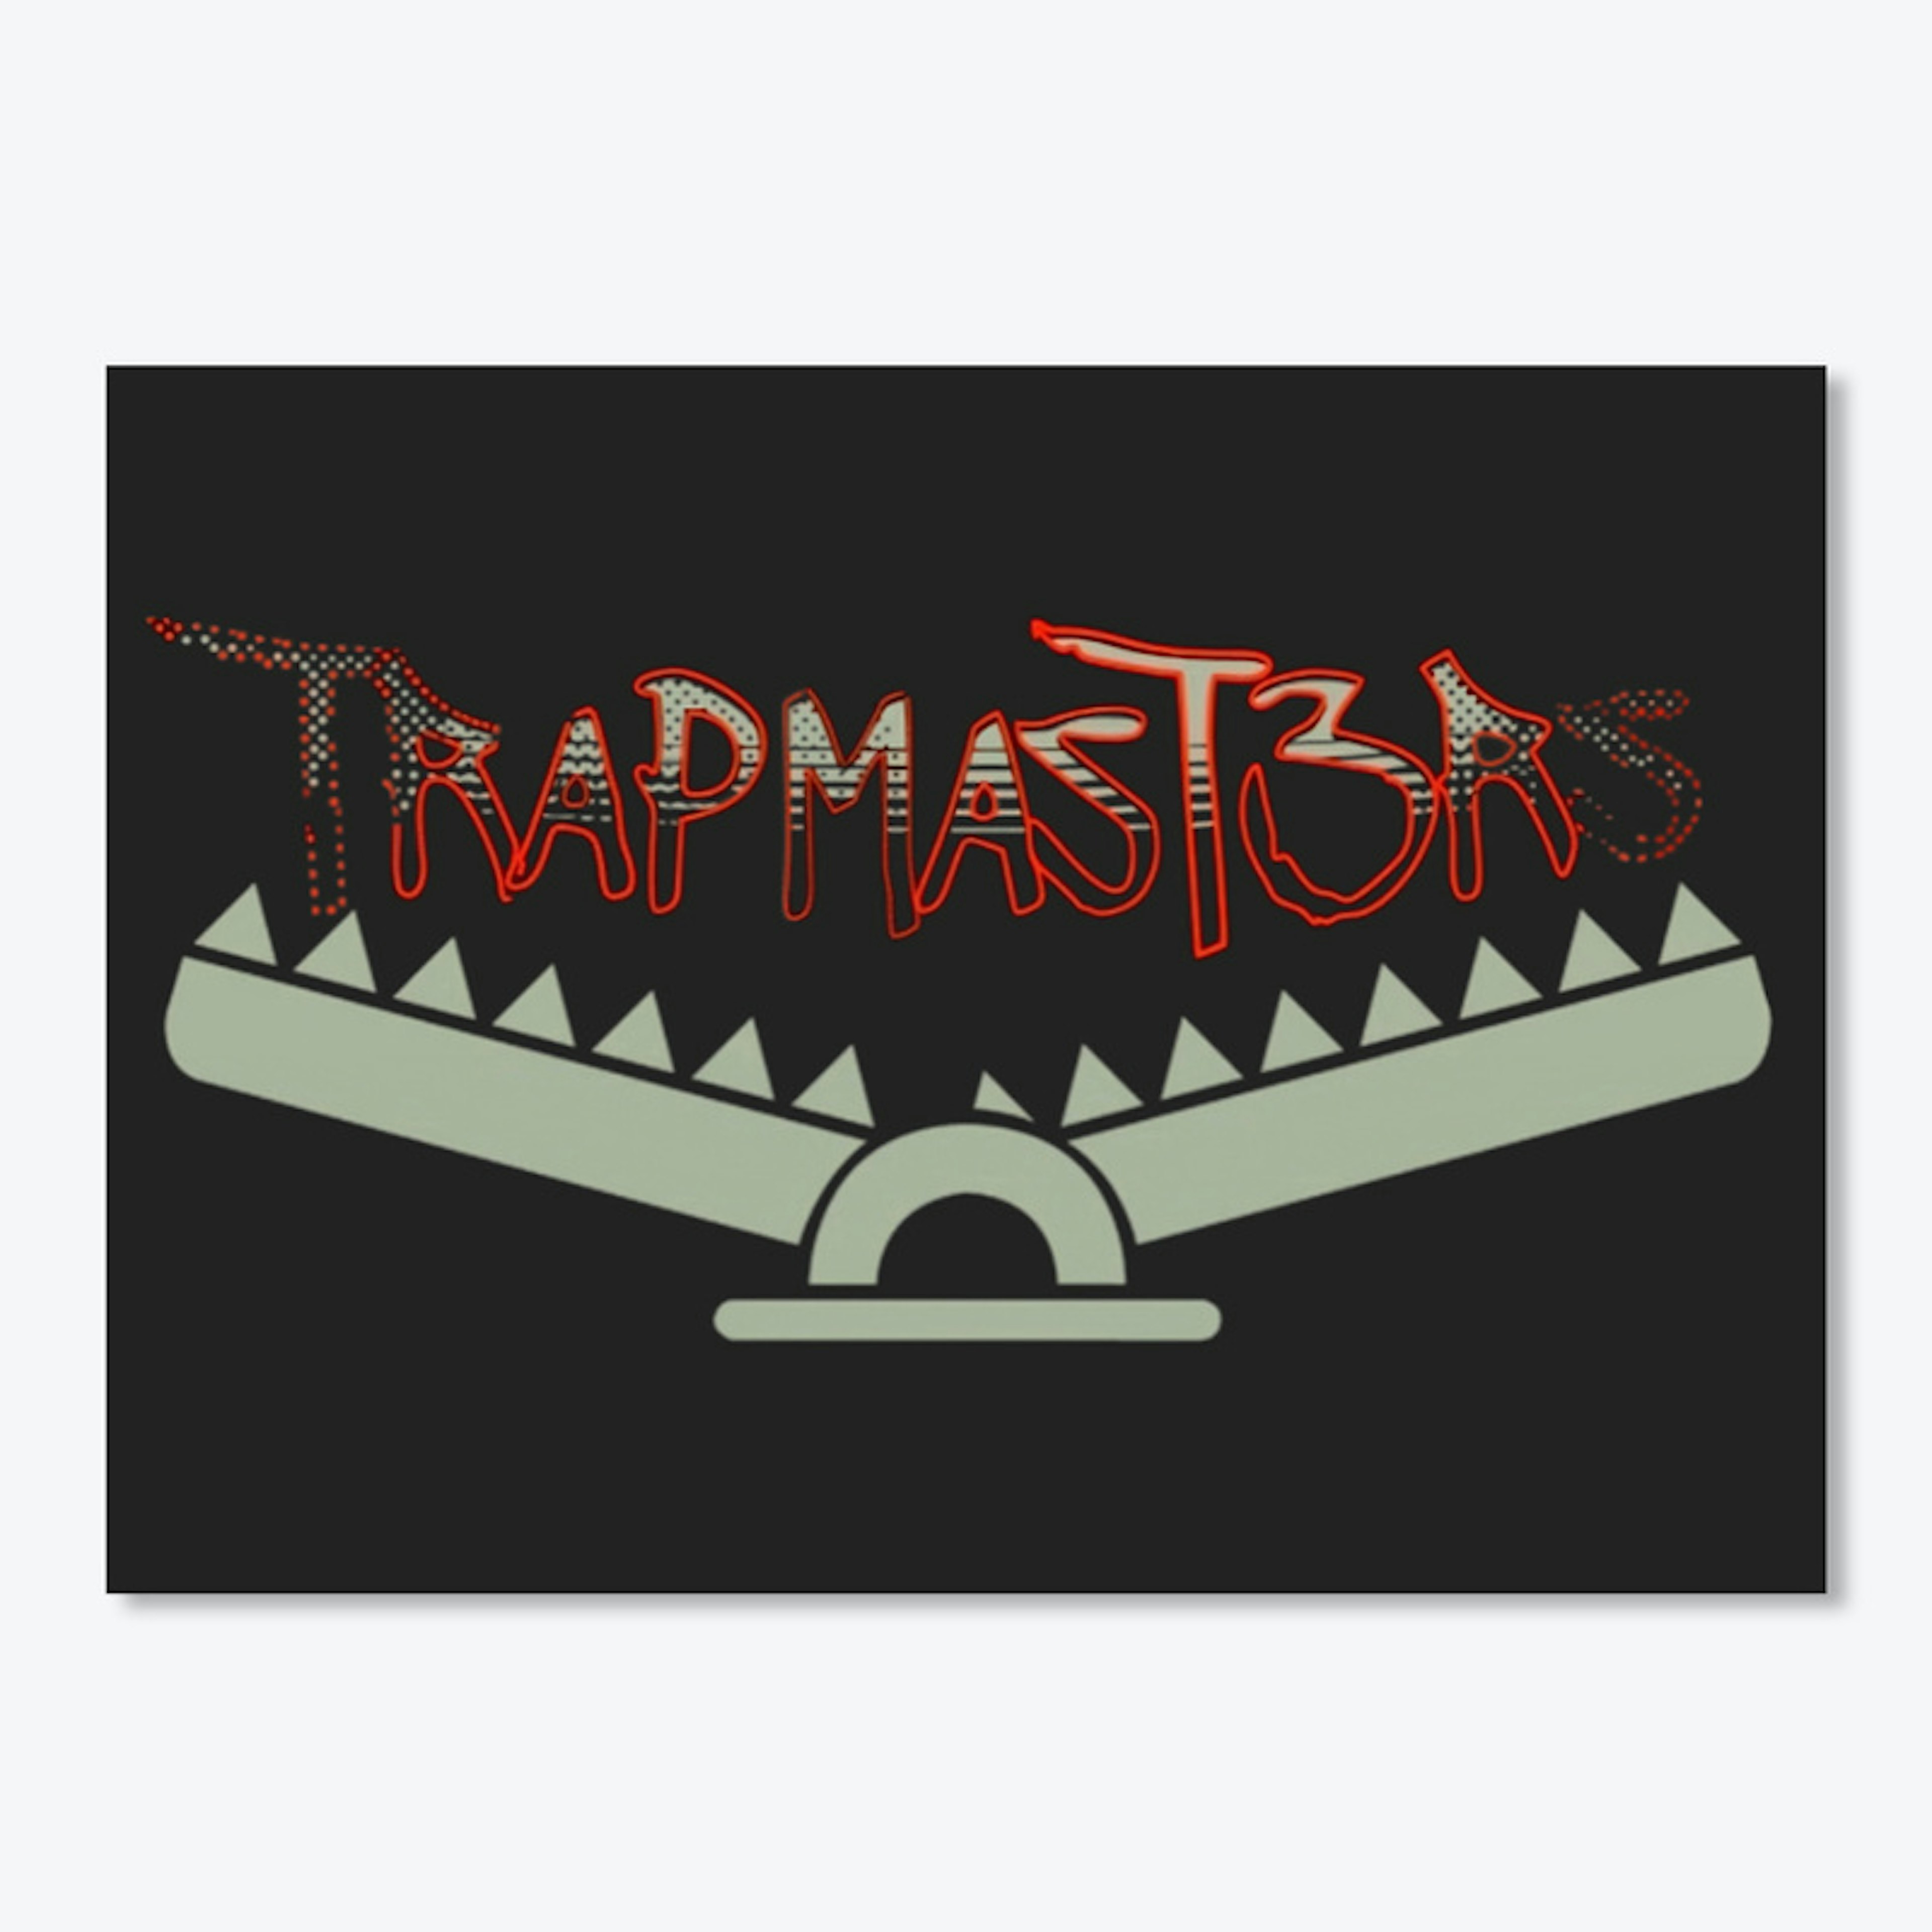 REALTRAPMAST3RS OFFICIAL NEW MERCH